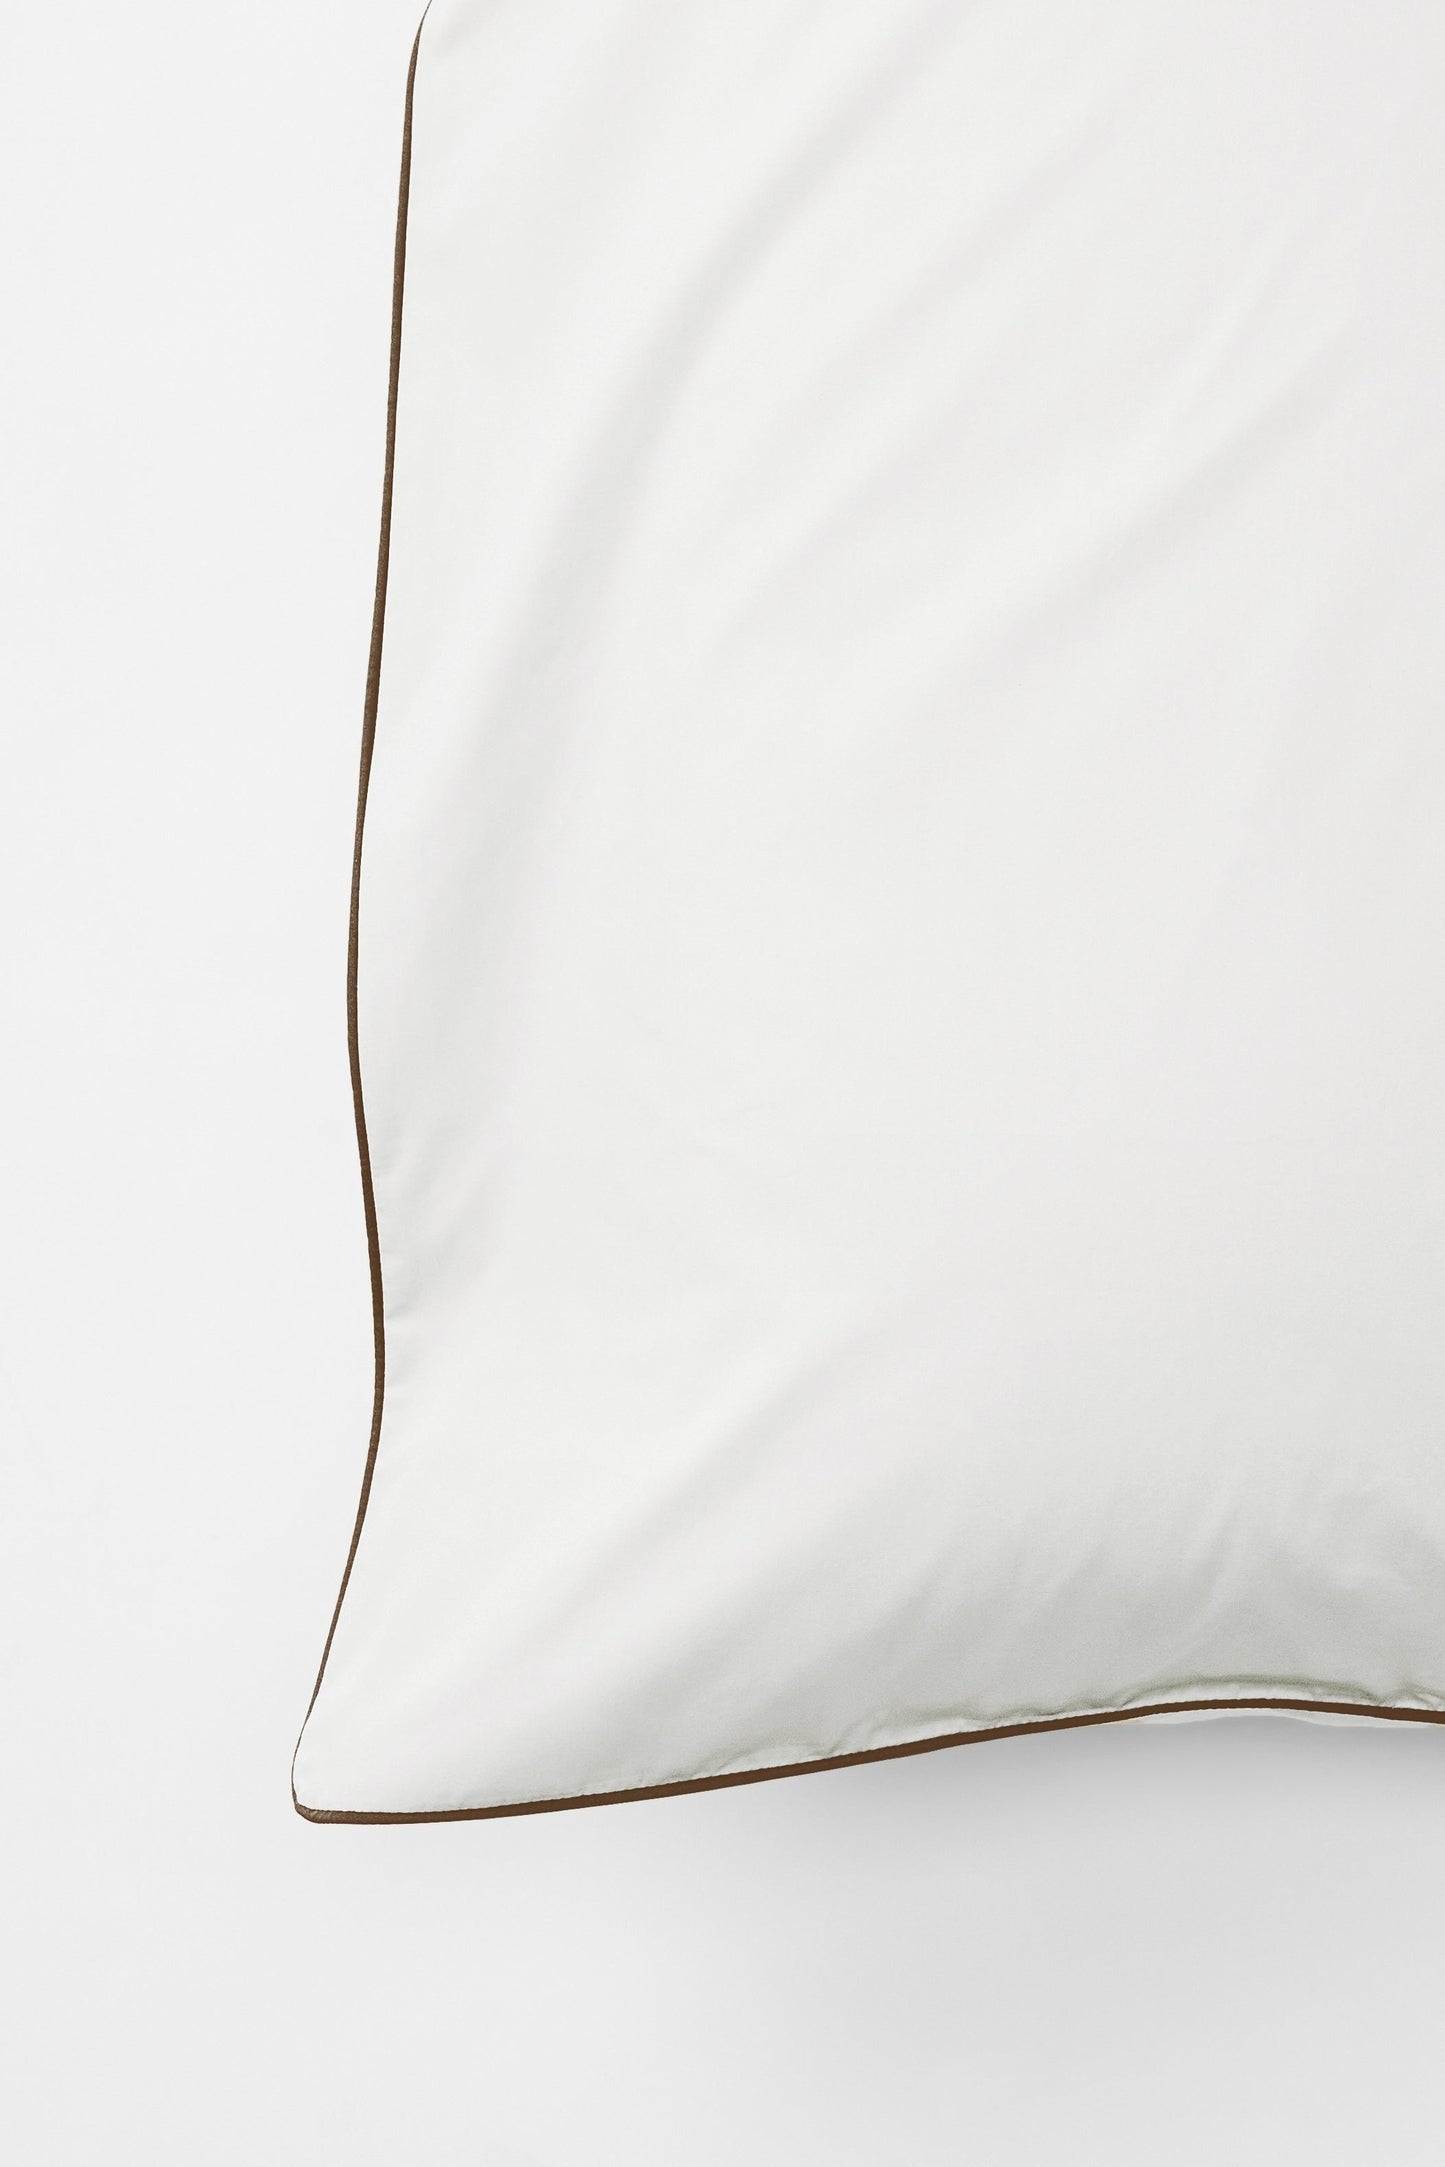 Contrast Edge Organic Cotton Percale Pillow Pair - Prism with Carob Pillows in Standard Pillow